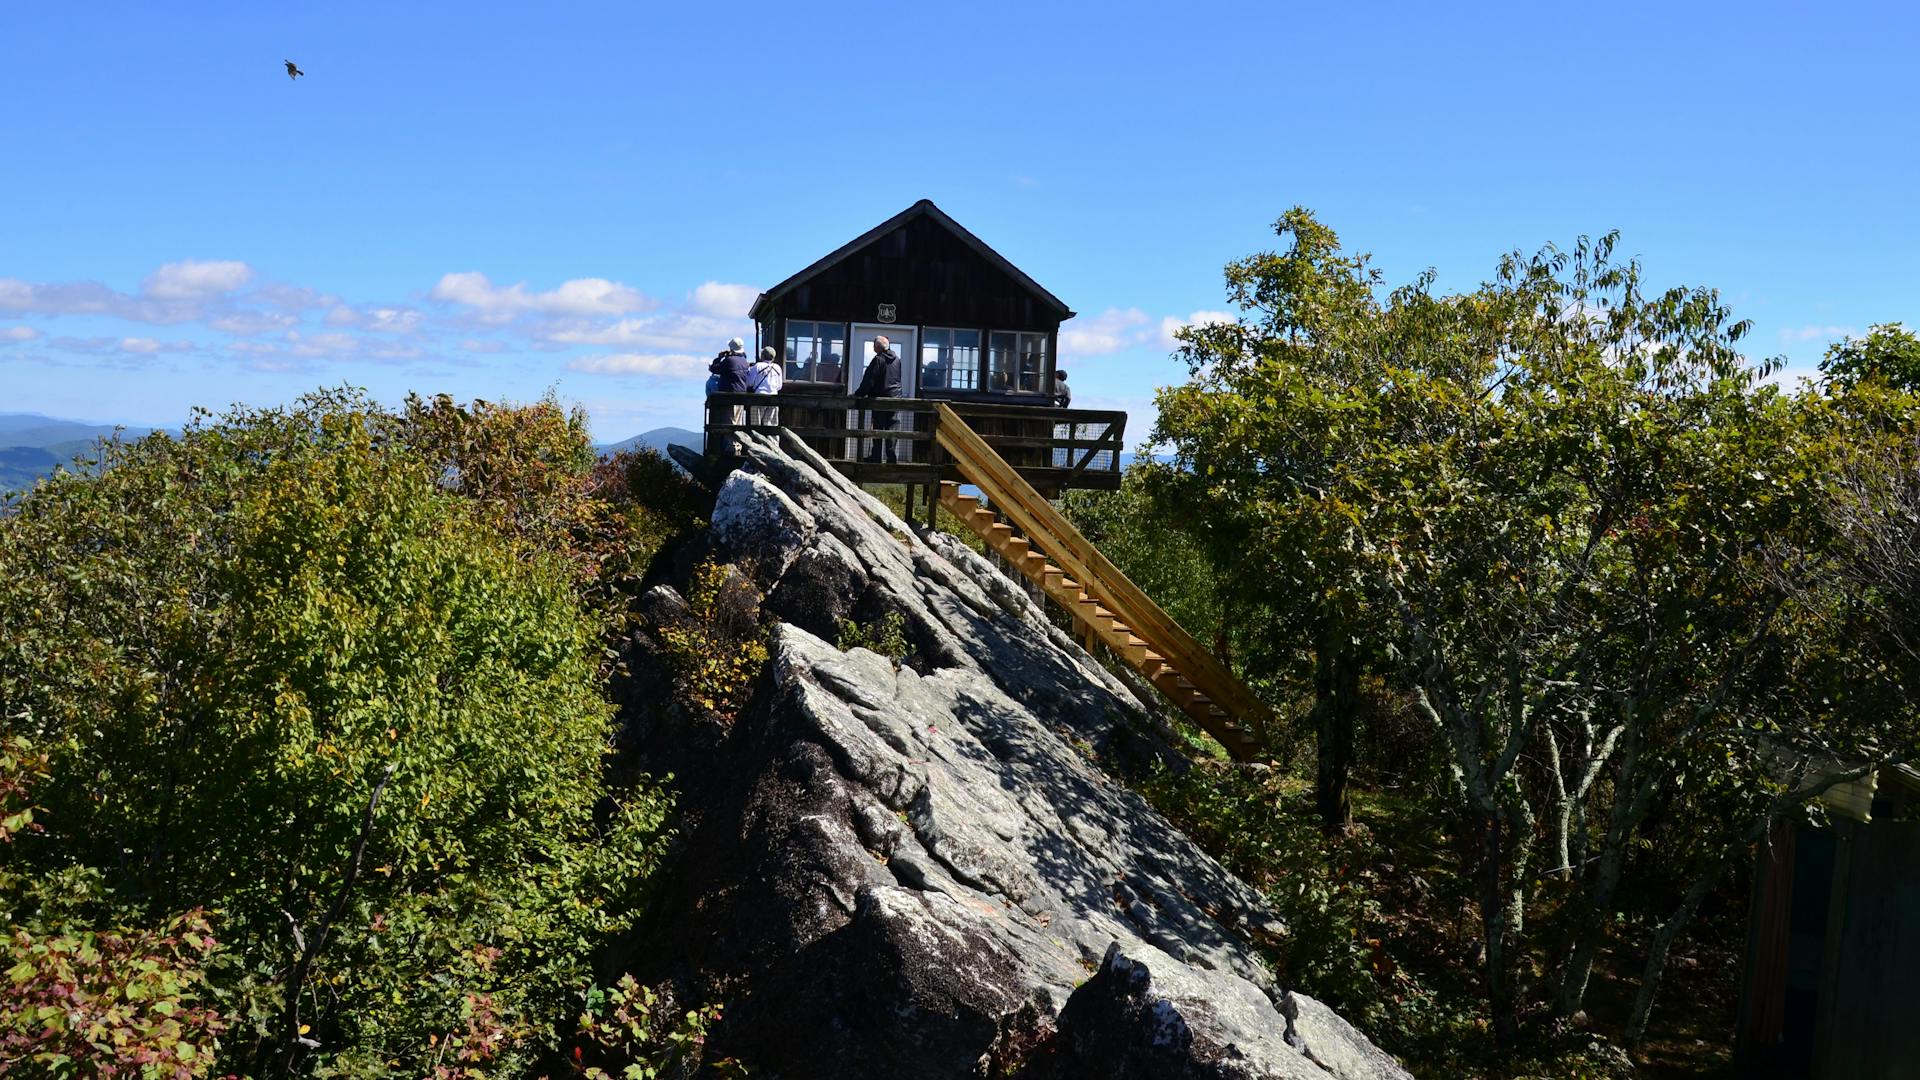 People looking out of Hanging Rock Raptor Observatory in Waiteville, West Virginia (photo by Sharyn Ogden)